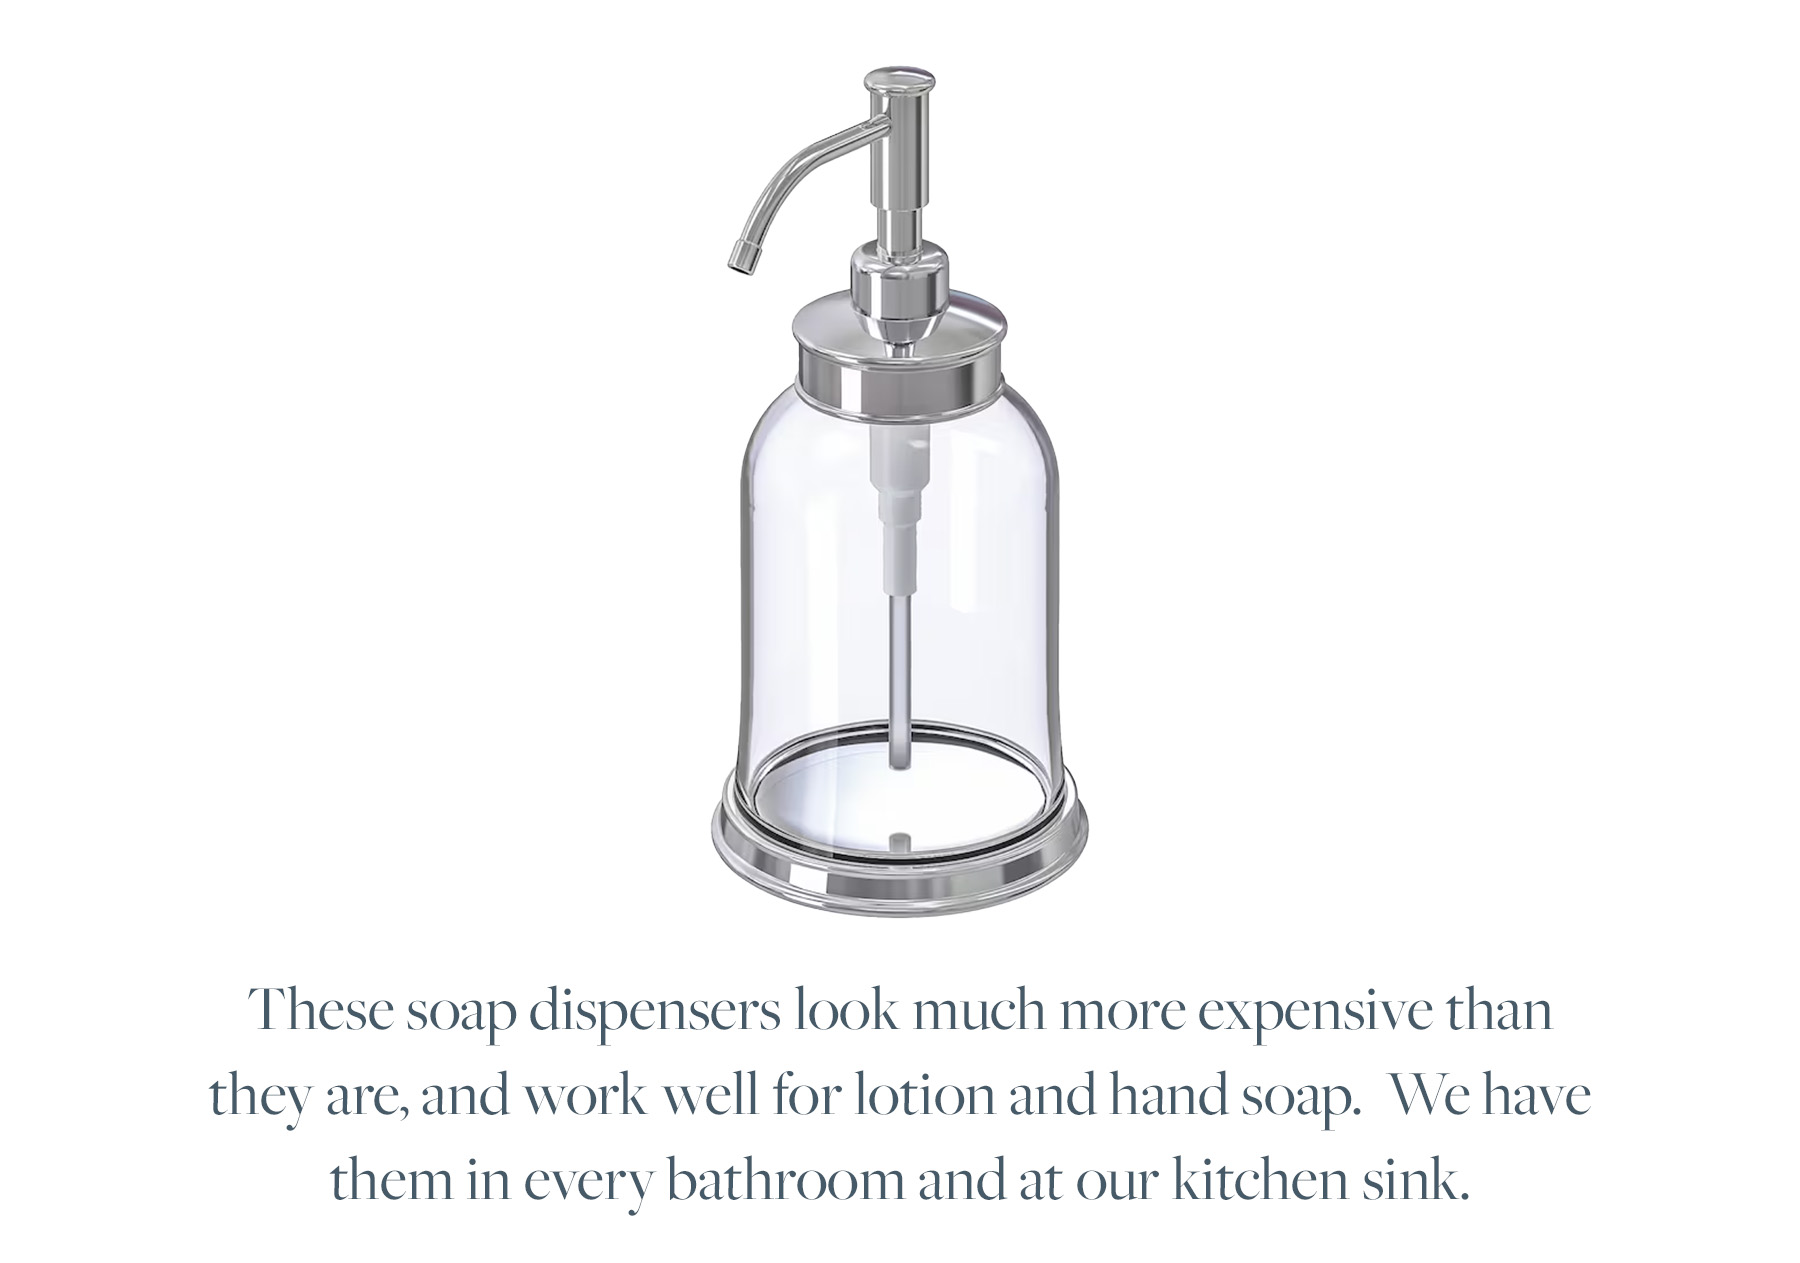 These soap dispensers look much more expensive than they are, and work well for lotion and hand soap. We have them in every bathroom and at our kitchen sink.